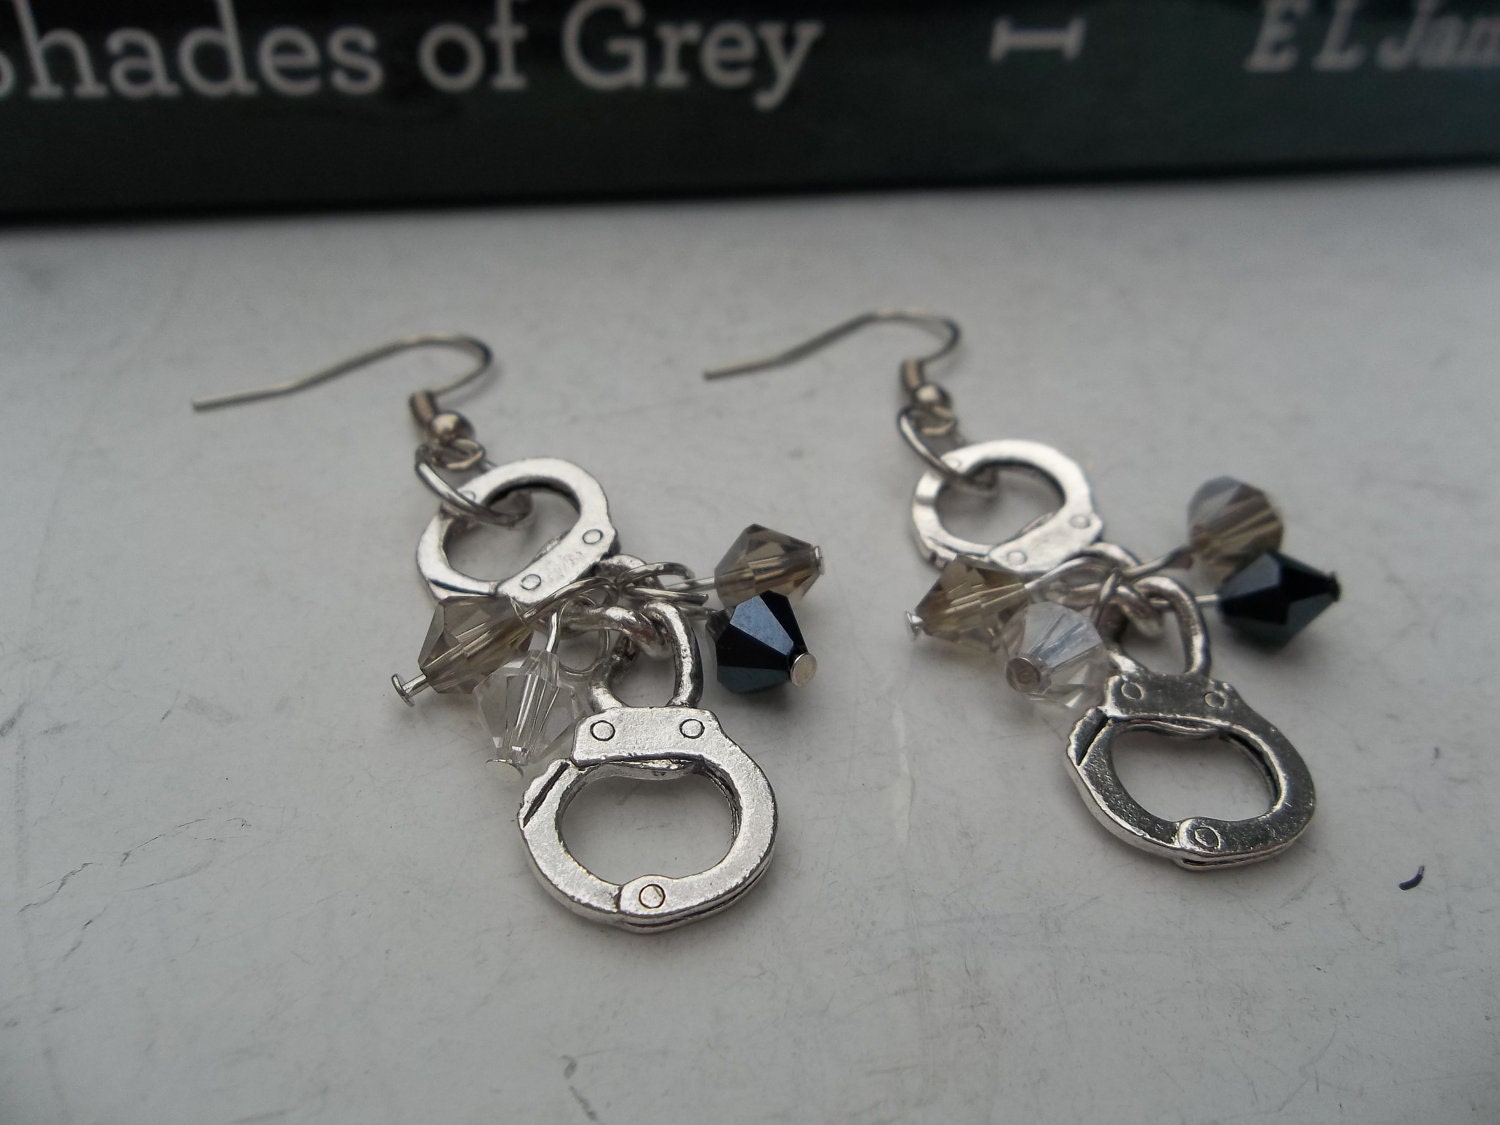 Fifty Shades of Grey Handcuff & Crystal Earrings Inspired by the Book 50 Shades FSOG